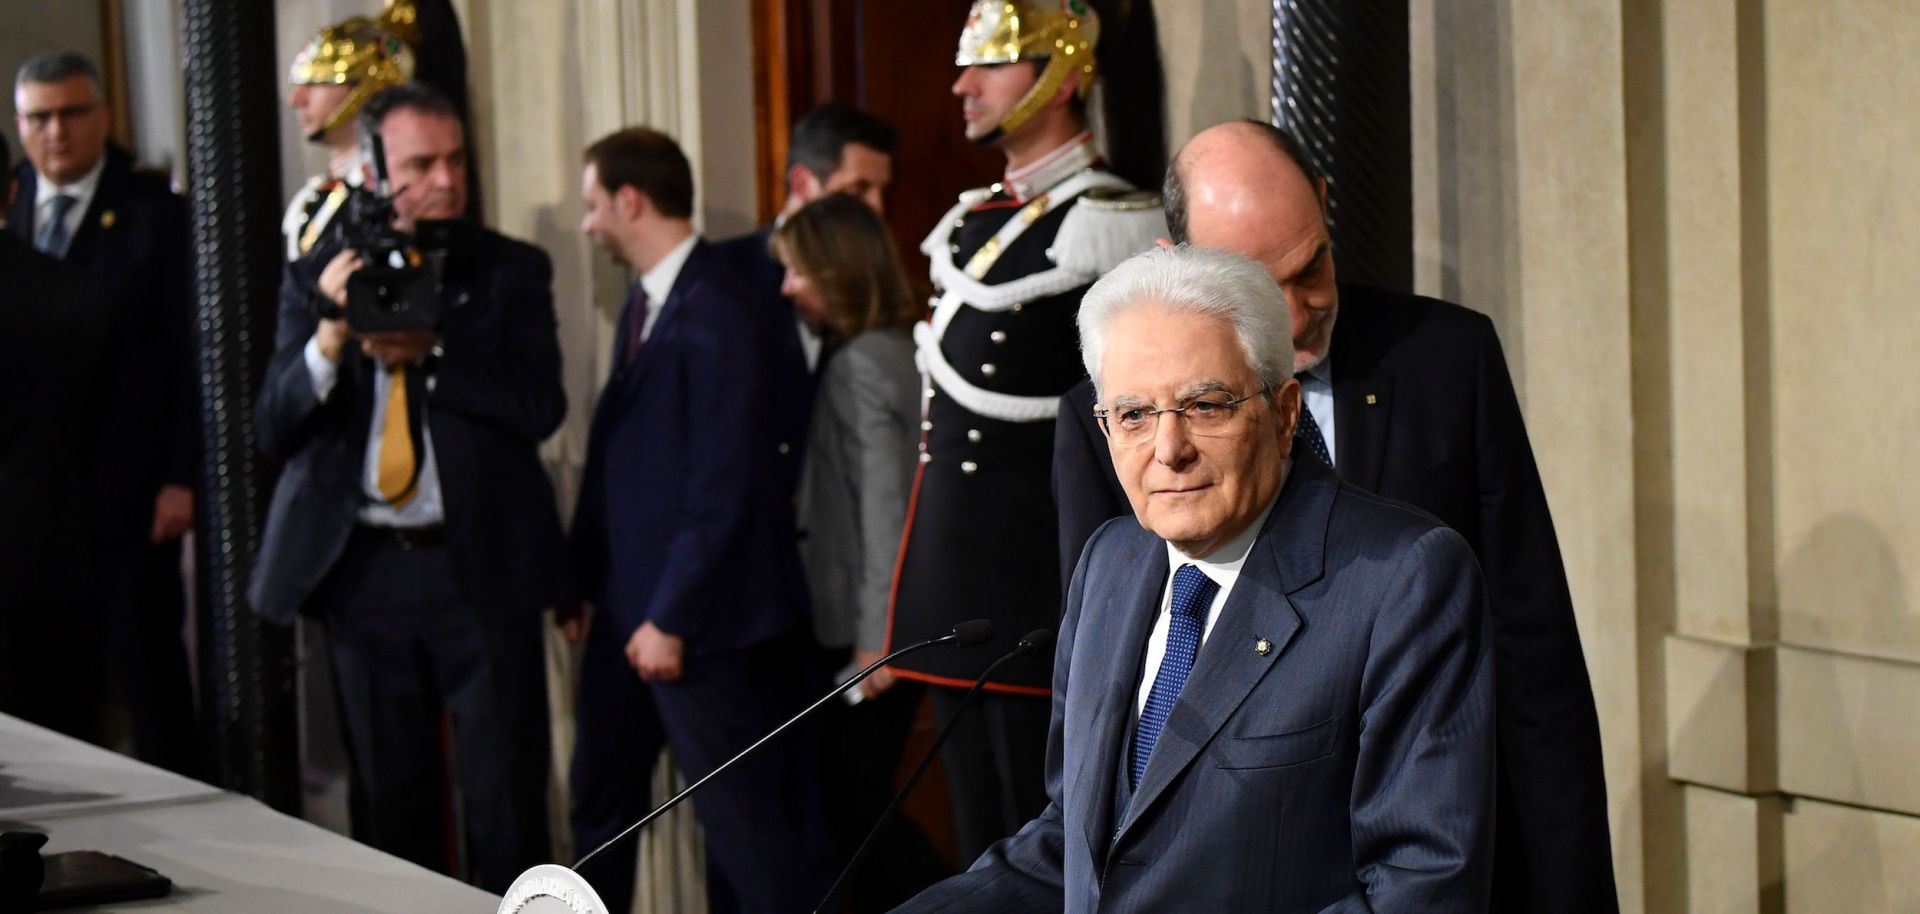 Italian President Sergio Mattarella delivers remarks to journalists as he and the leaders of Italy's political parties negotiate a path toward forming a government.